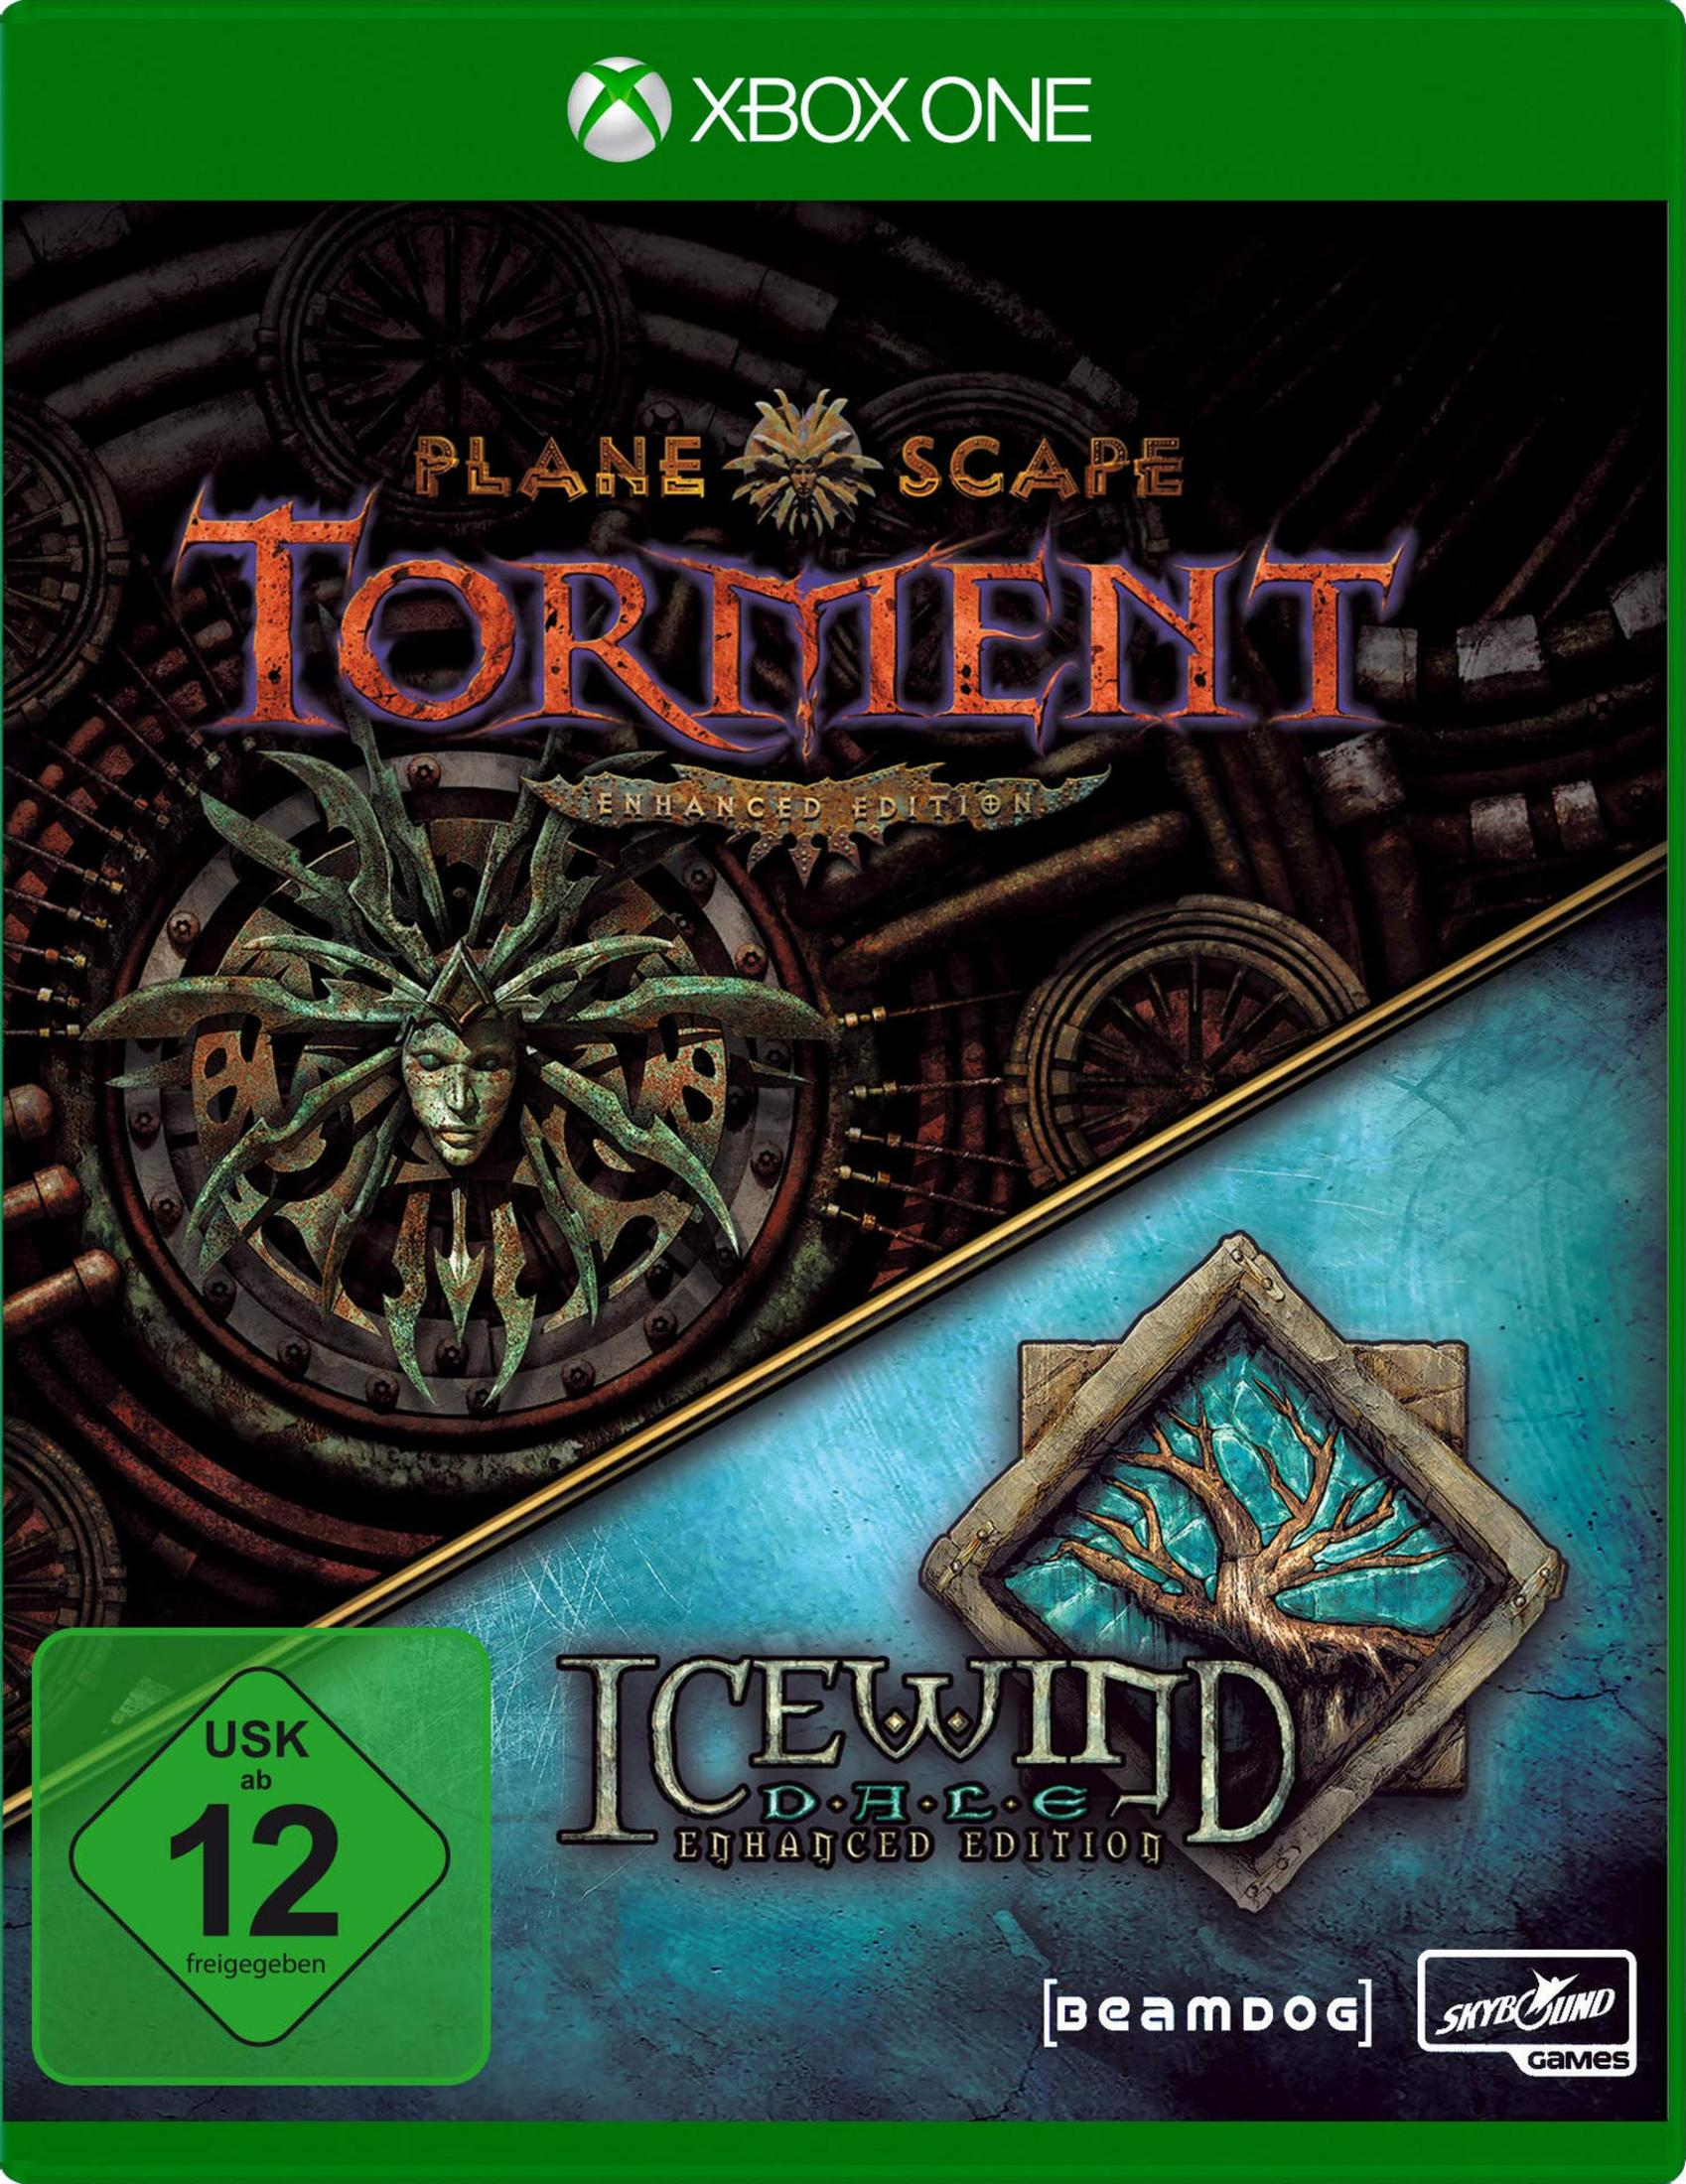 Planescape: Torment & Icewind Dale Enhanced One] [Xbox - Edition